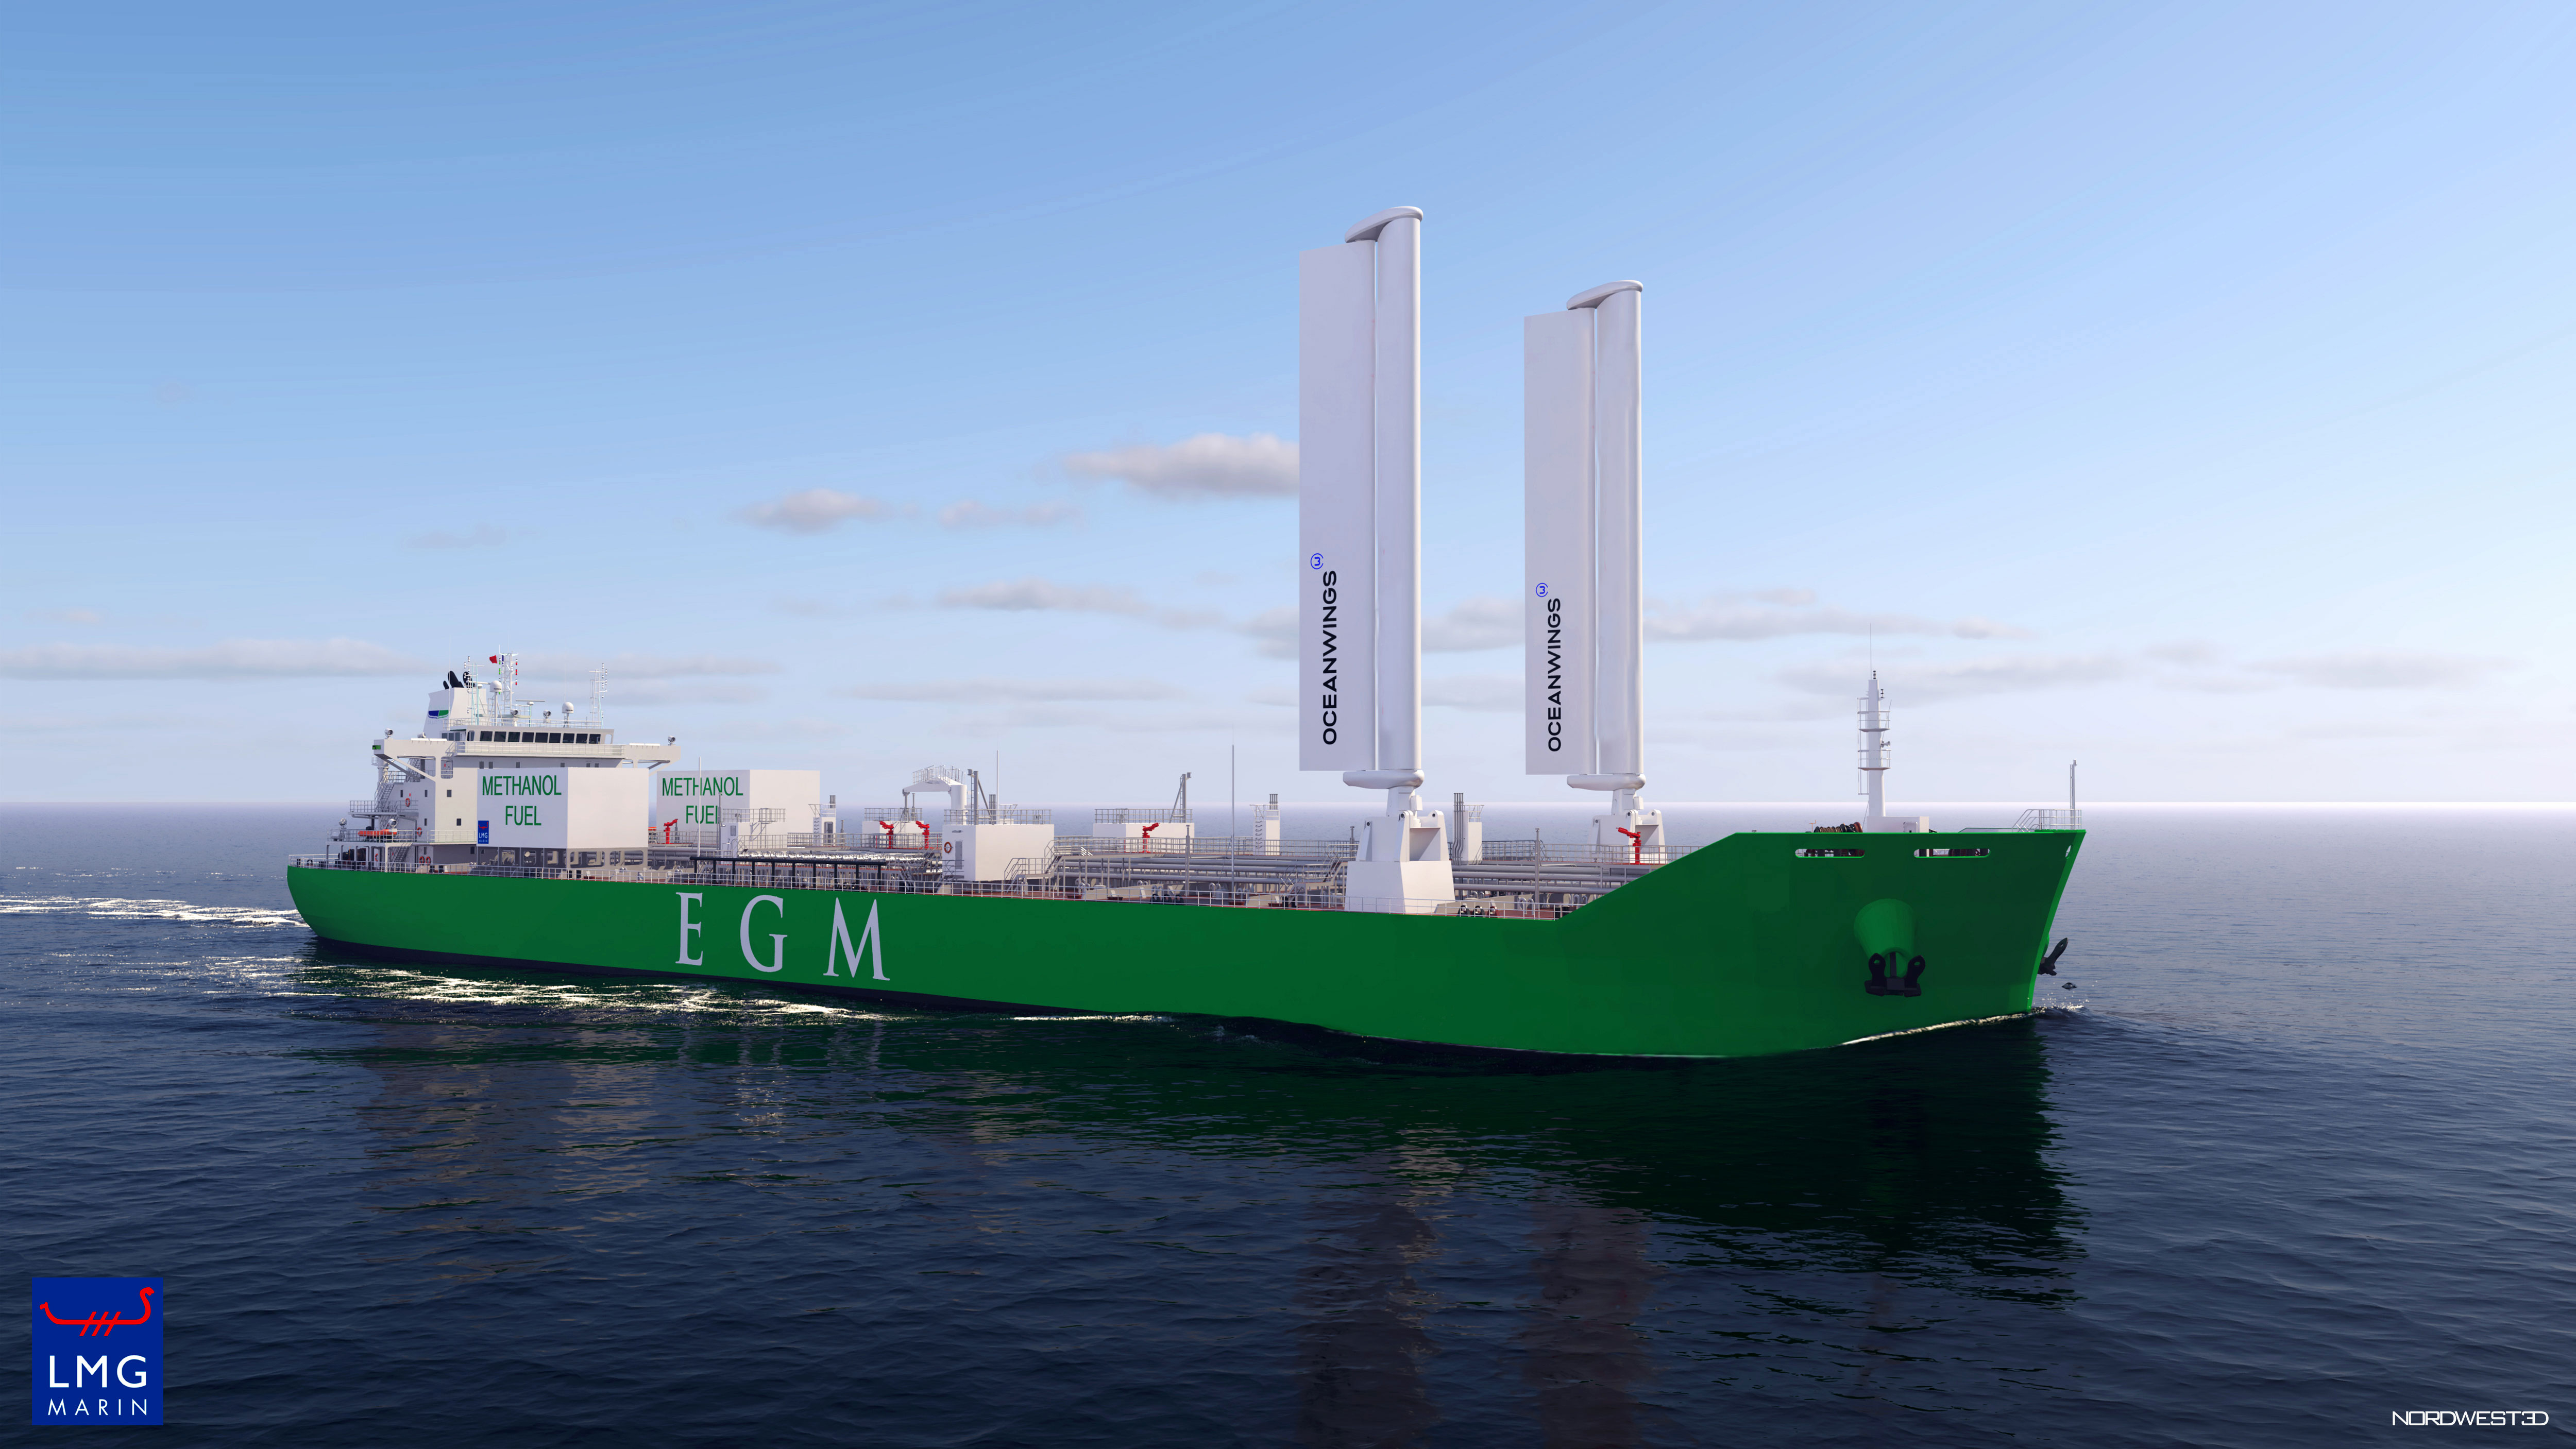 EuroGreen Maritime Secures Seven-Year Charter with Equinor ASA for Four Advanced Hybrid Battery / Dual-Fuel Methanol Tankers with Wingsails